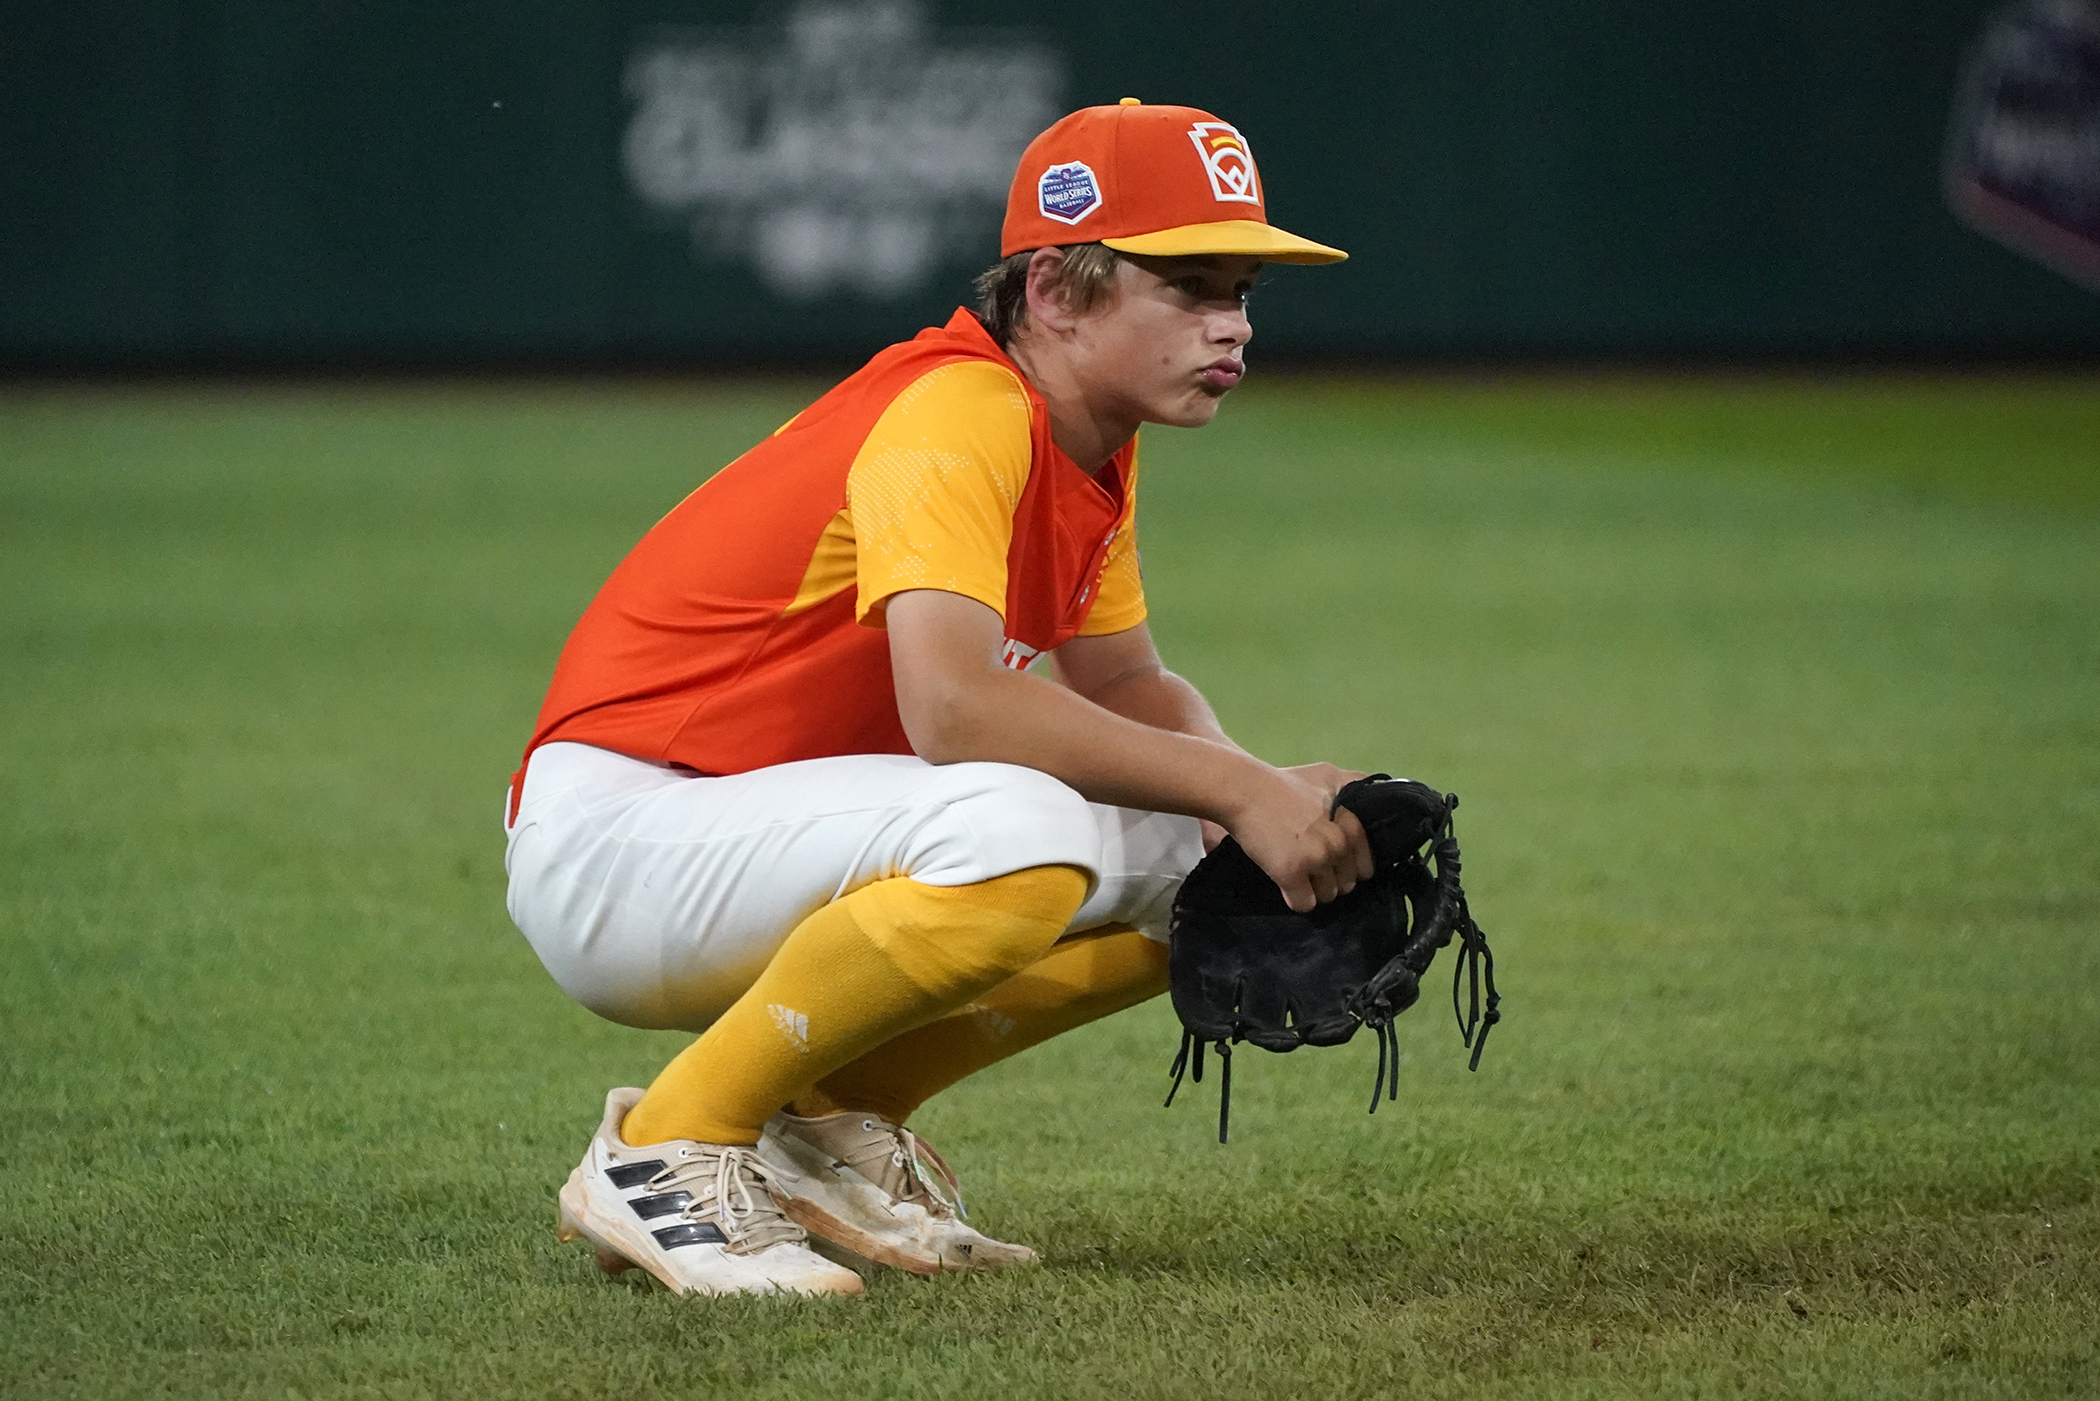 Pearlands pursuit of Little League World Series title ends in 7-1 loss to Tennessee